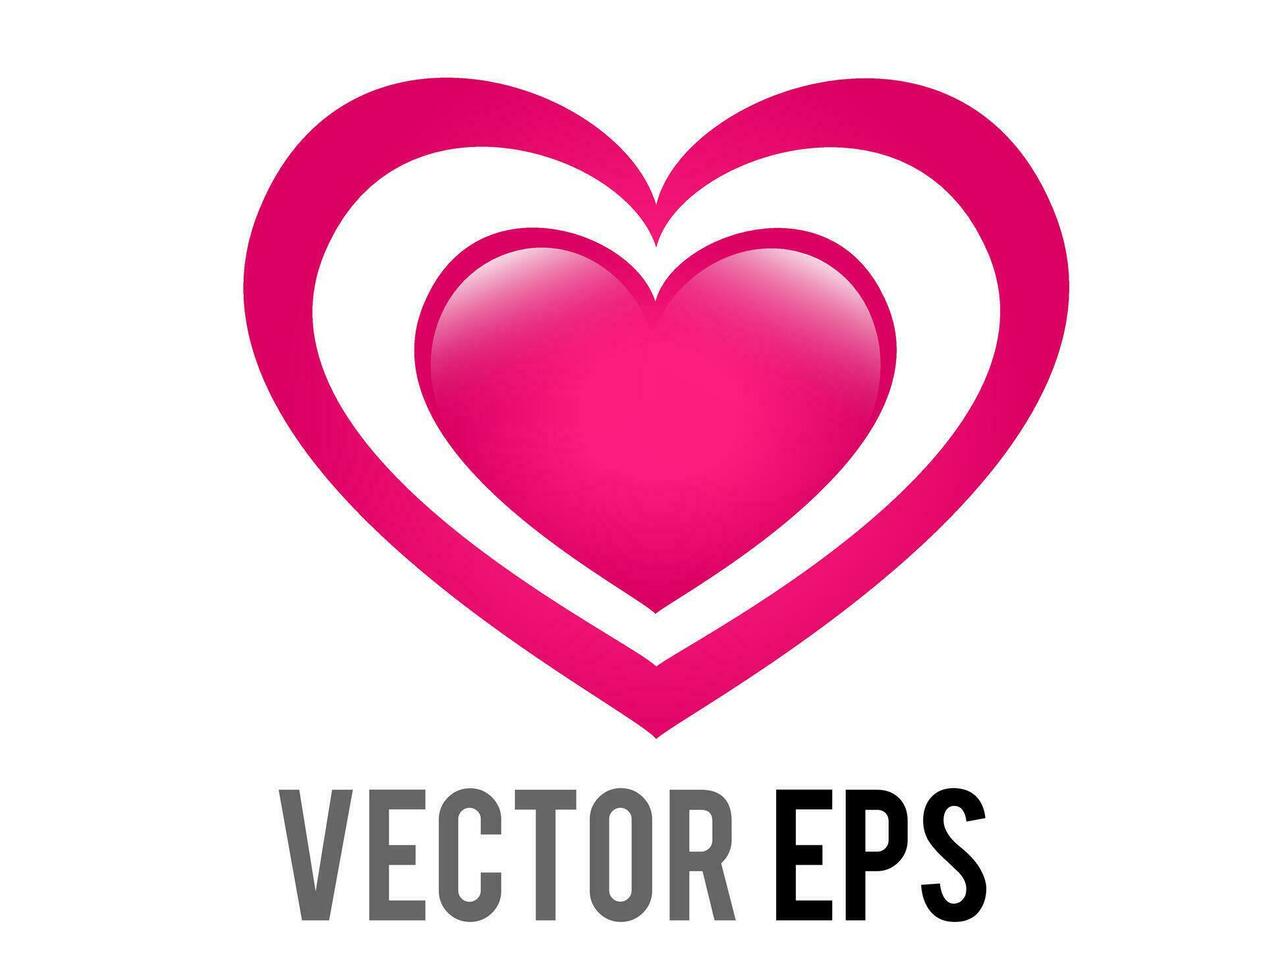 Vector glossy pink love glowing heart icon